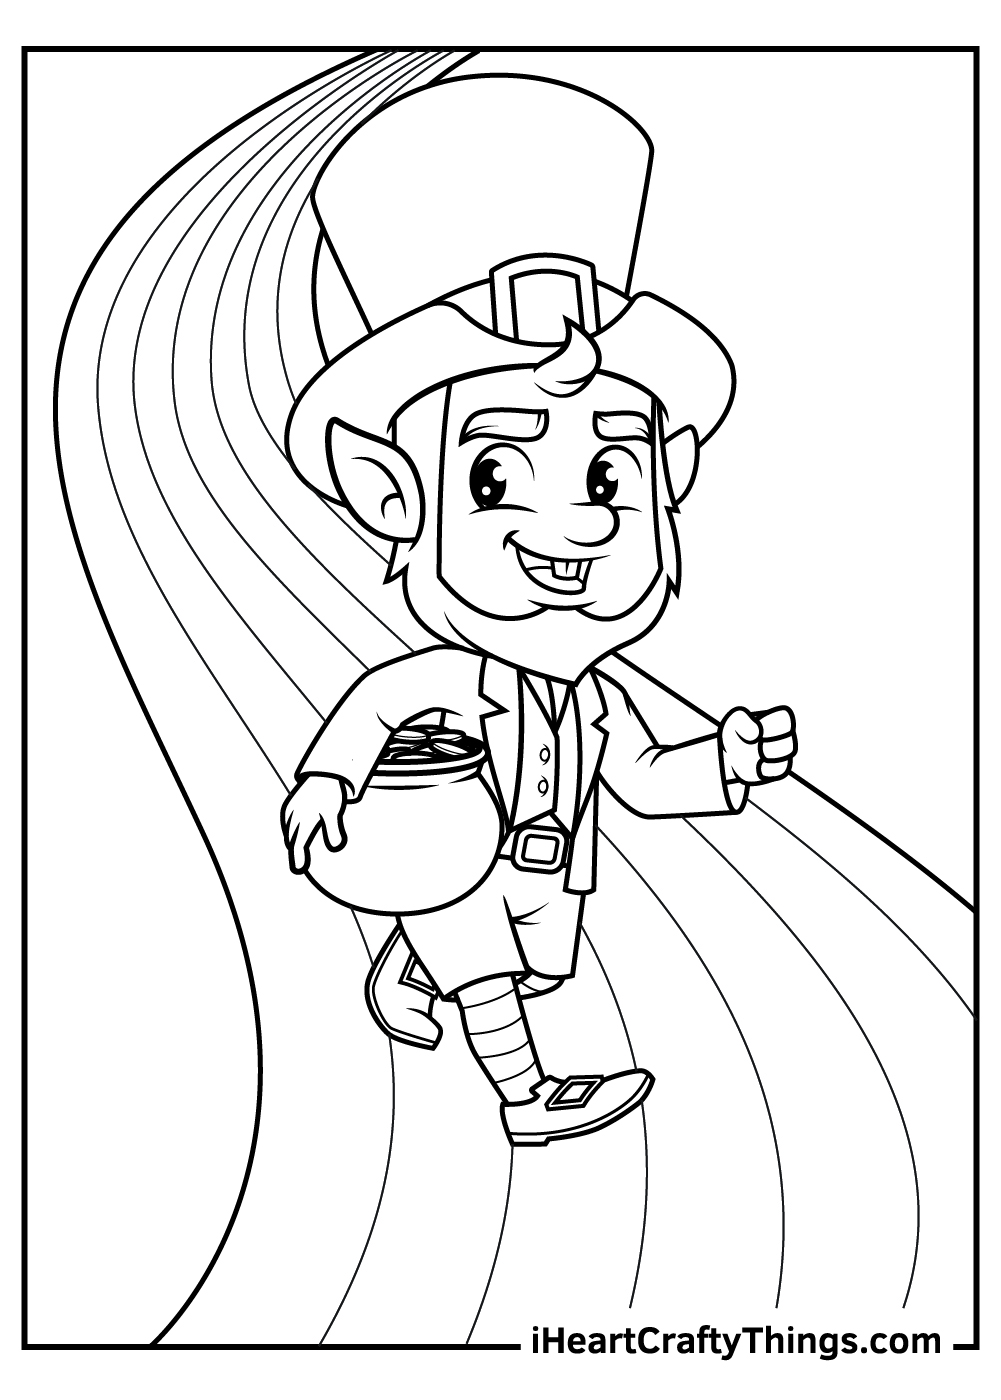 Leprechaun coloring pages updated